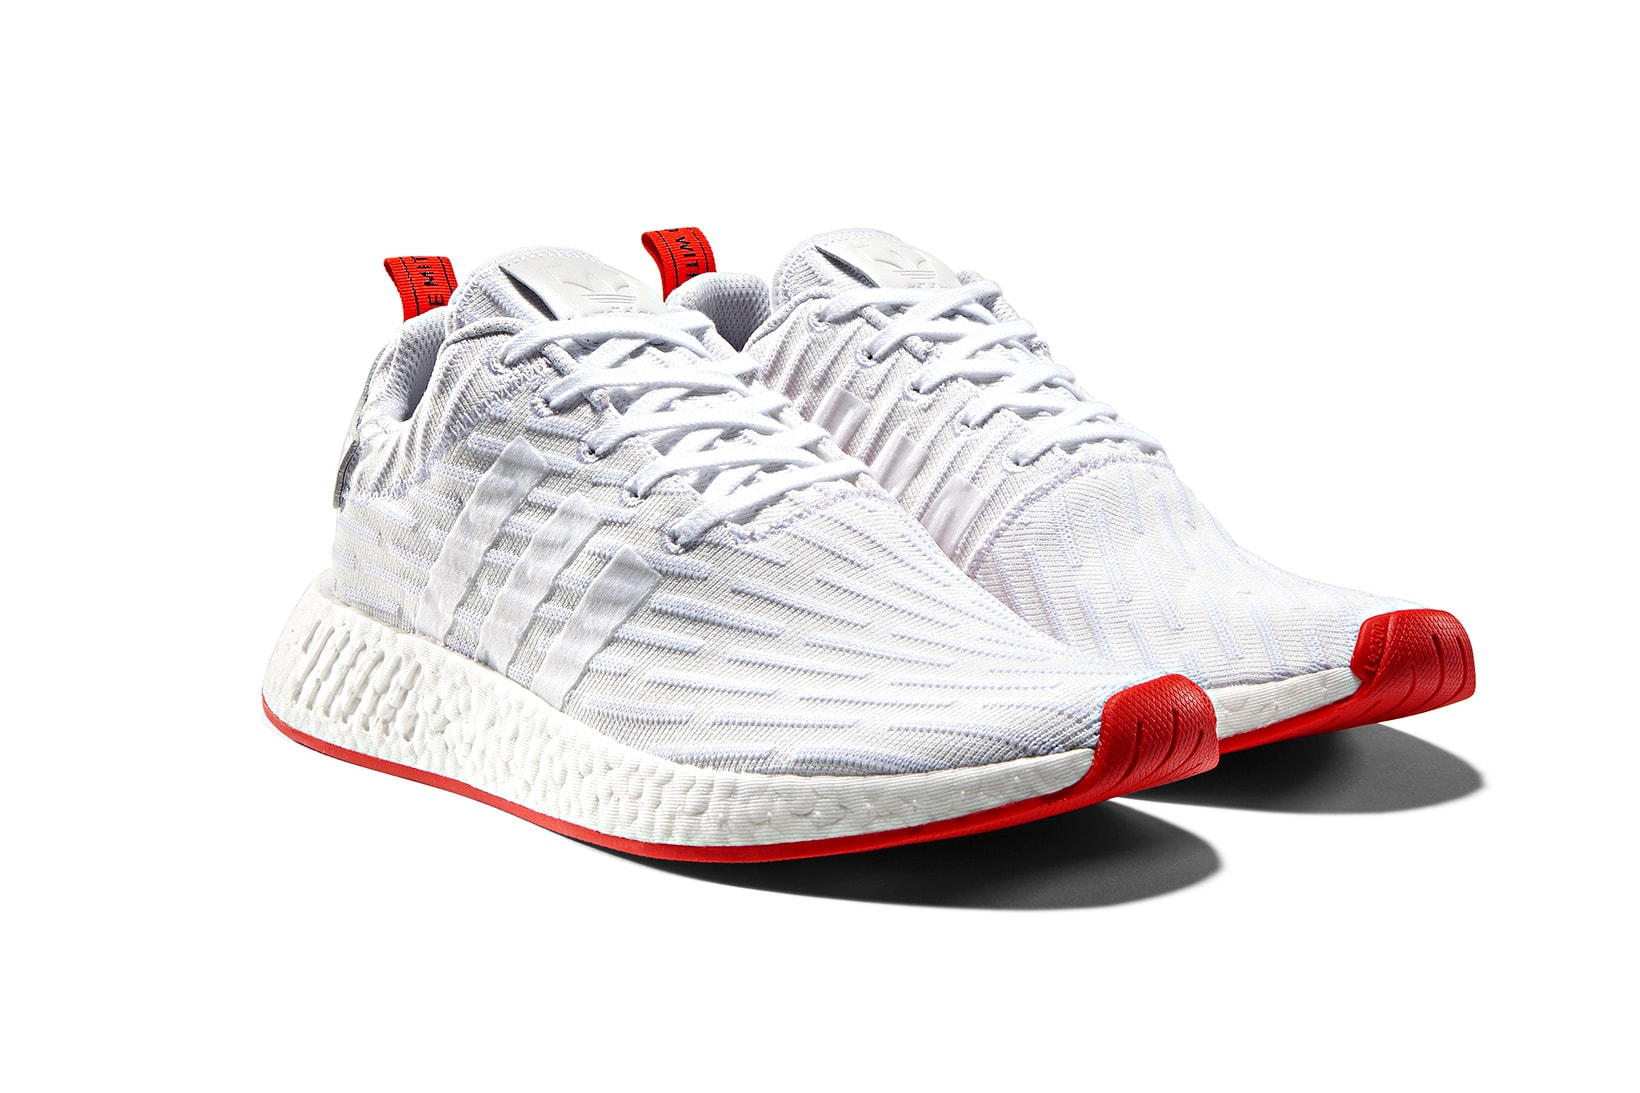 adidas NMD R2 White Red